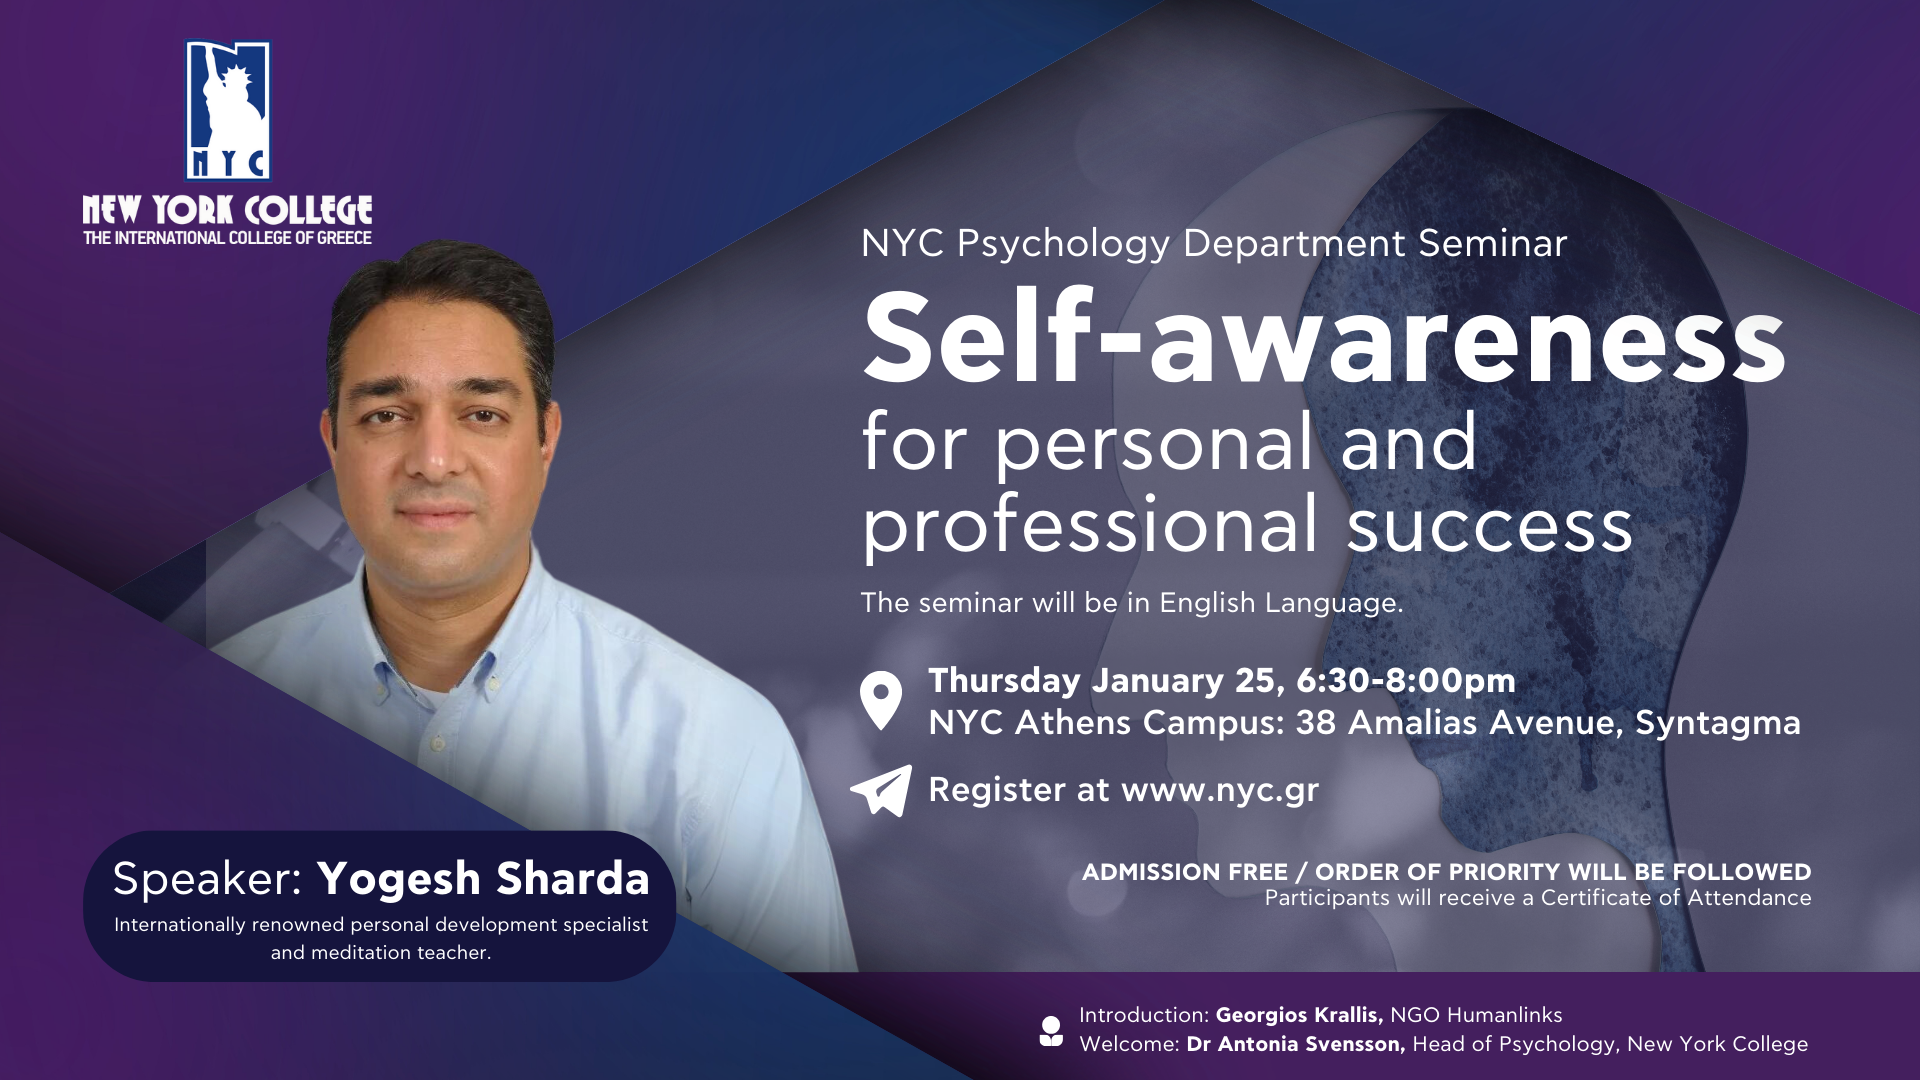 Seminar on: “Self-awareness for personal and professional success”